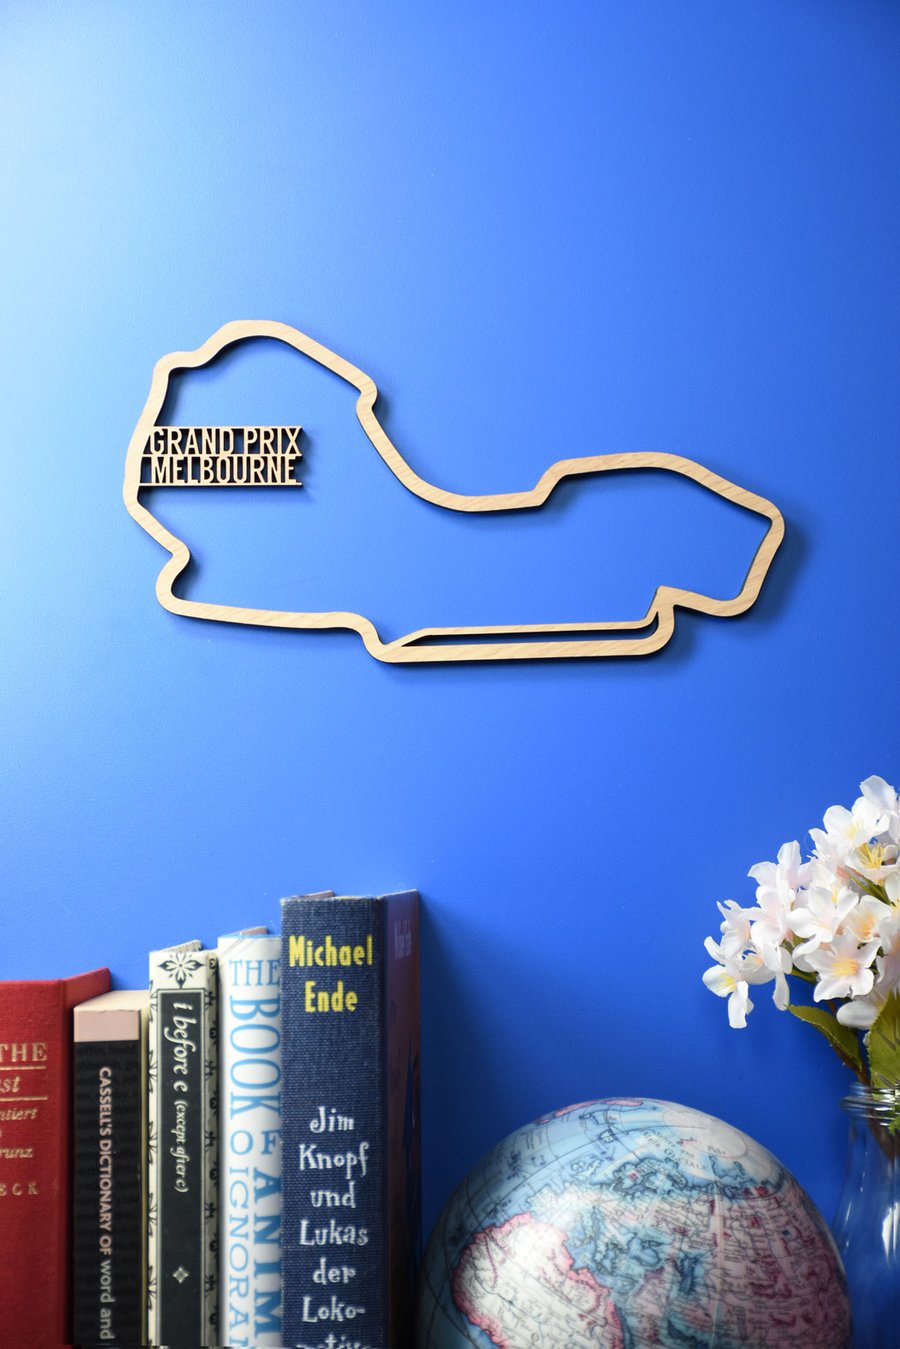 Melbourne race track Wall decoration